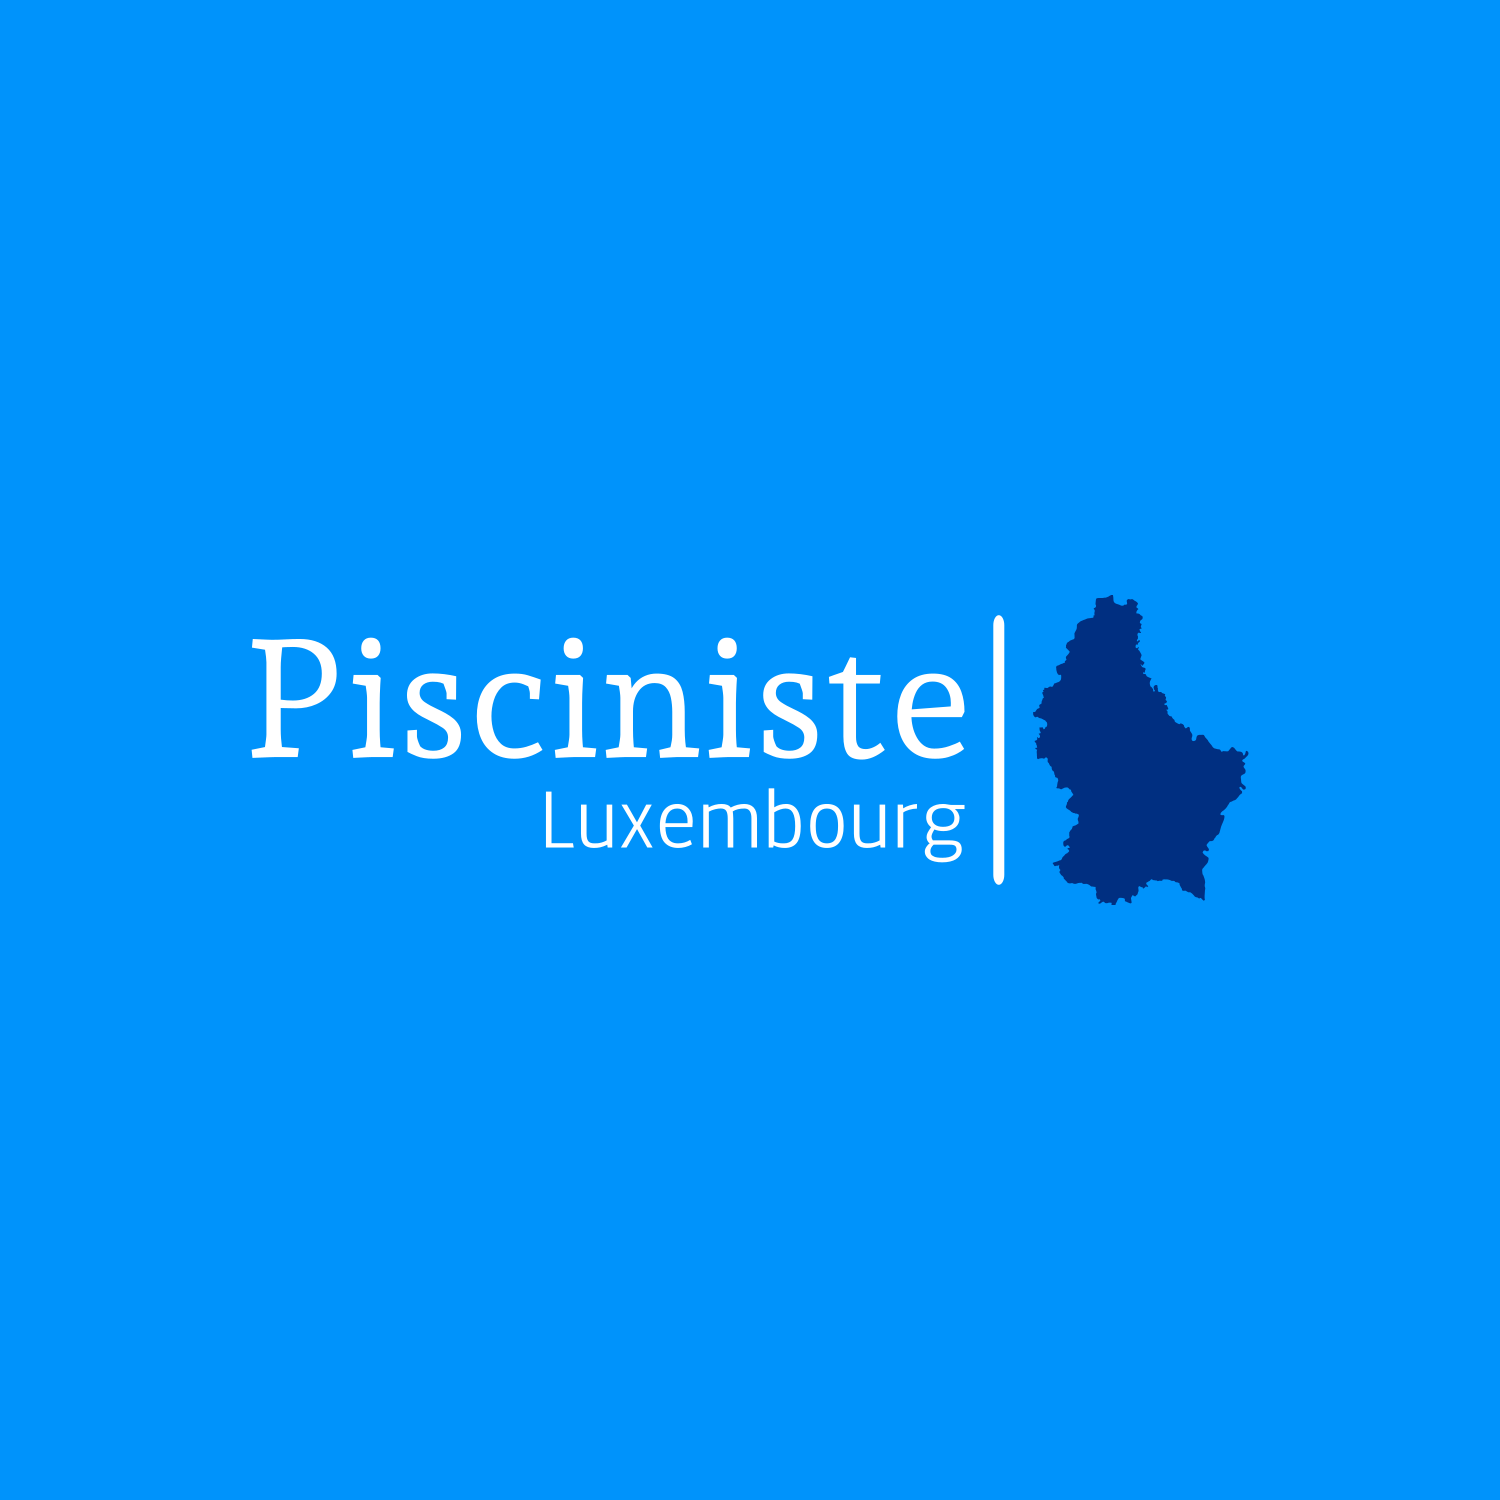 Pisciniste Luxembourg